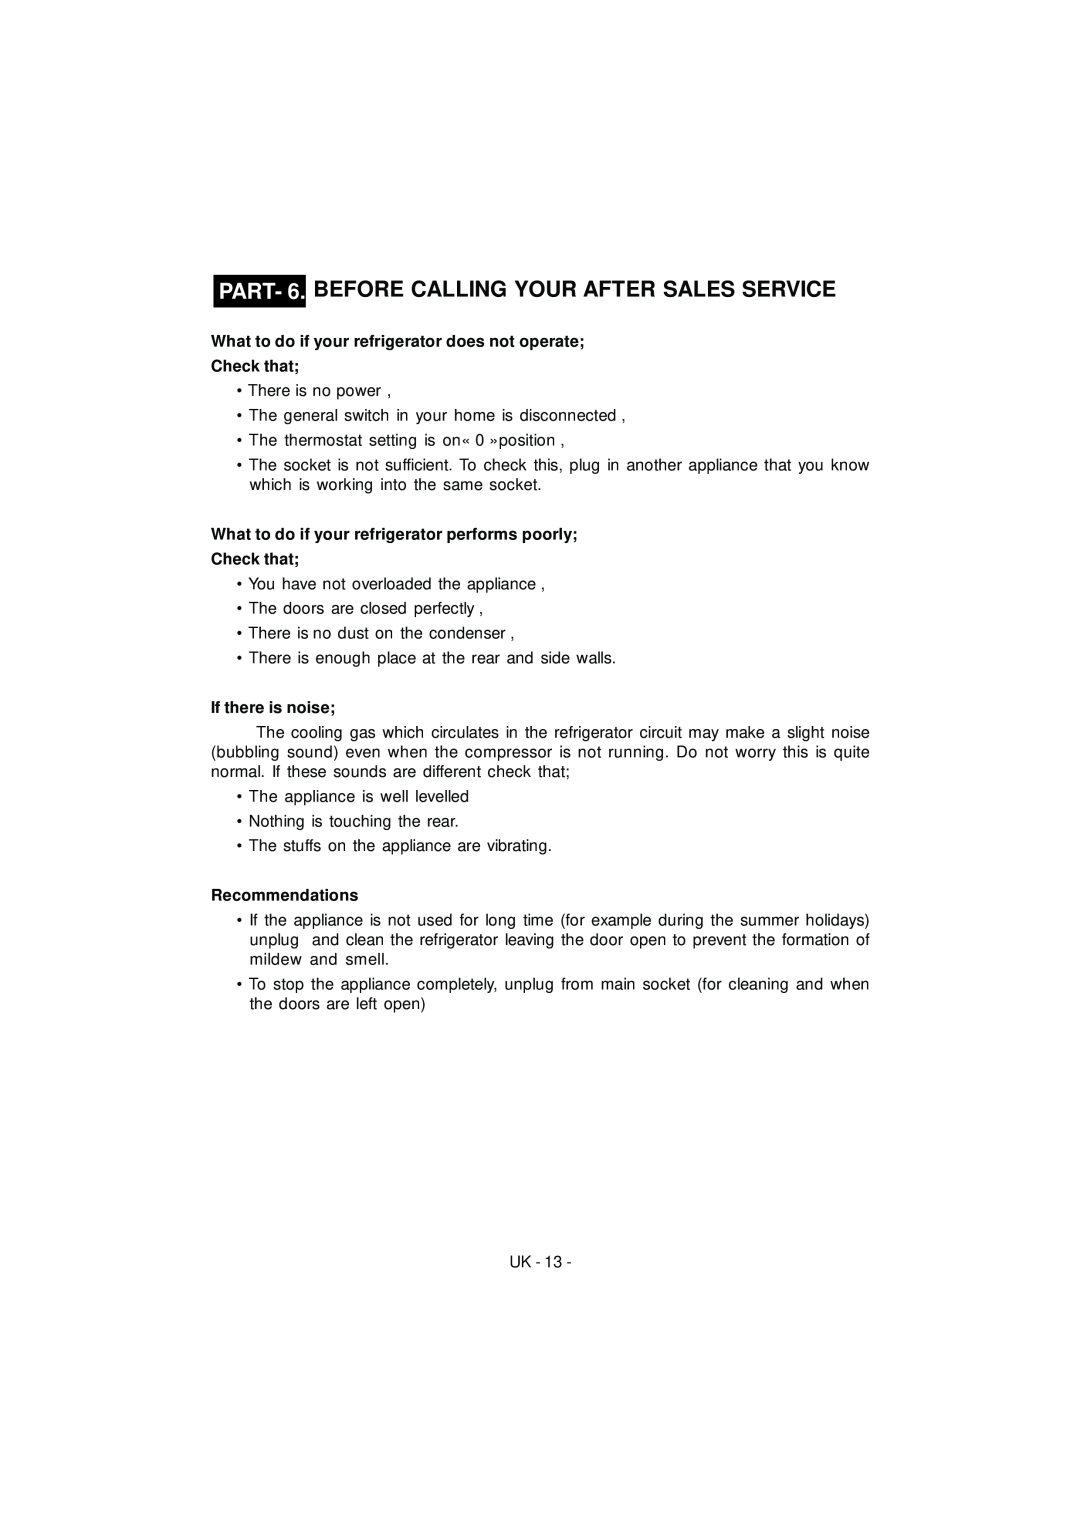 Smeg FD43APXNF, FD43APBNF manual PART- 6. BEFORE CALLING YOUR AFTER SALES SERVICE, If there is noise, Recommendations 